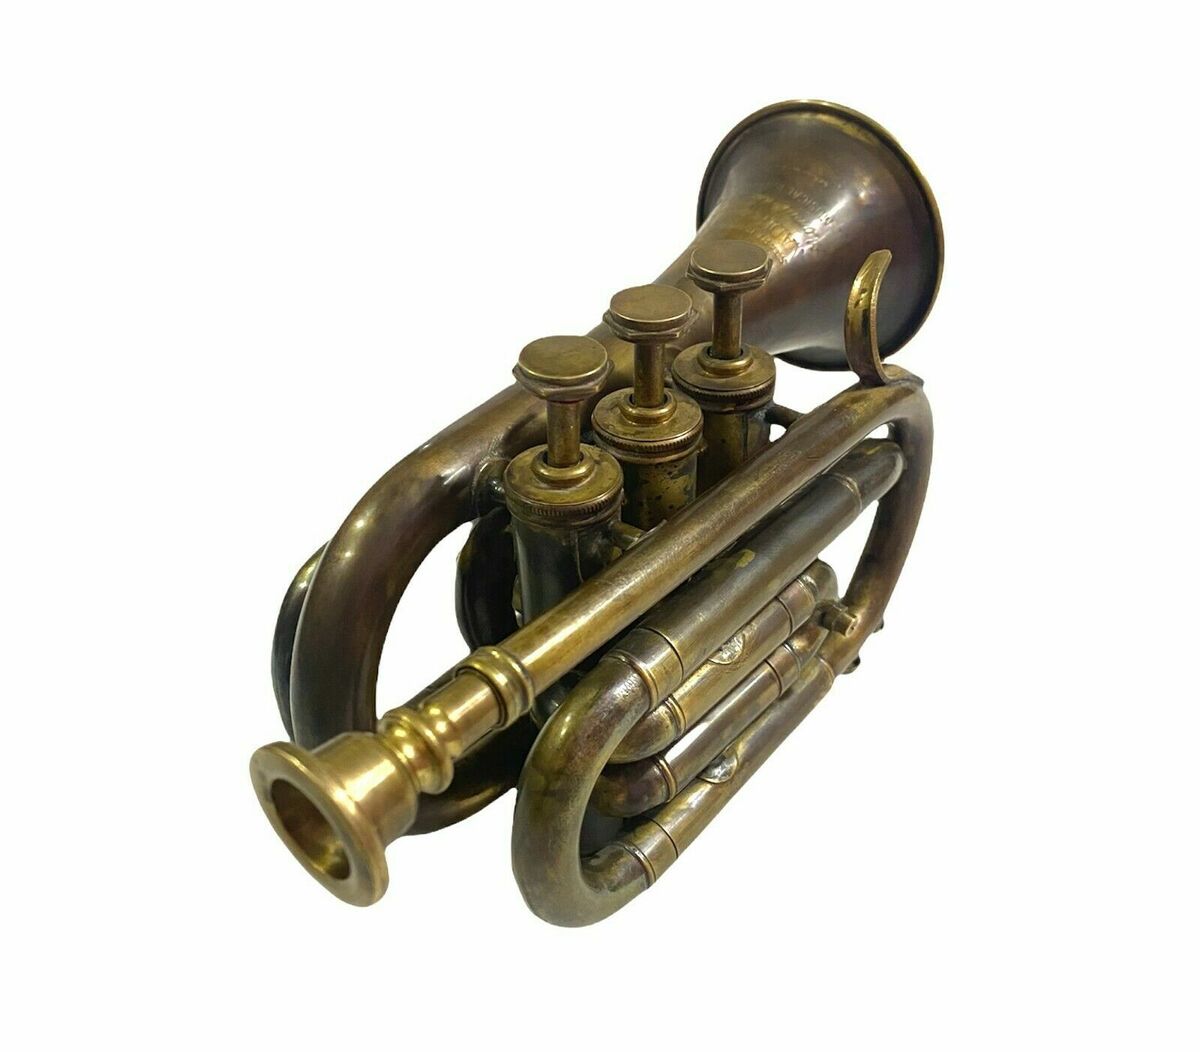 Nautical Antique Brass Trumpet Pocket Bugle Horn 3 Valve Mouthpiece for Gift